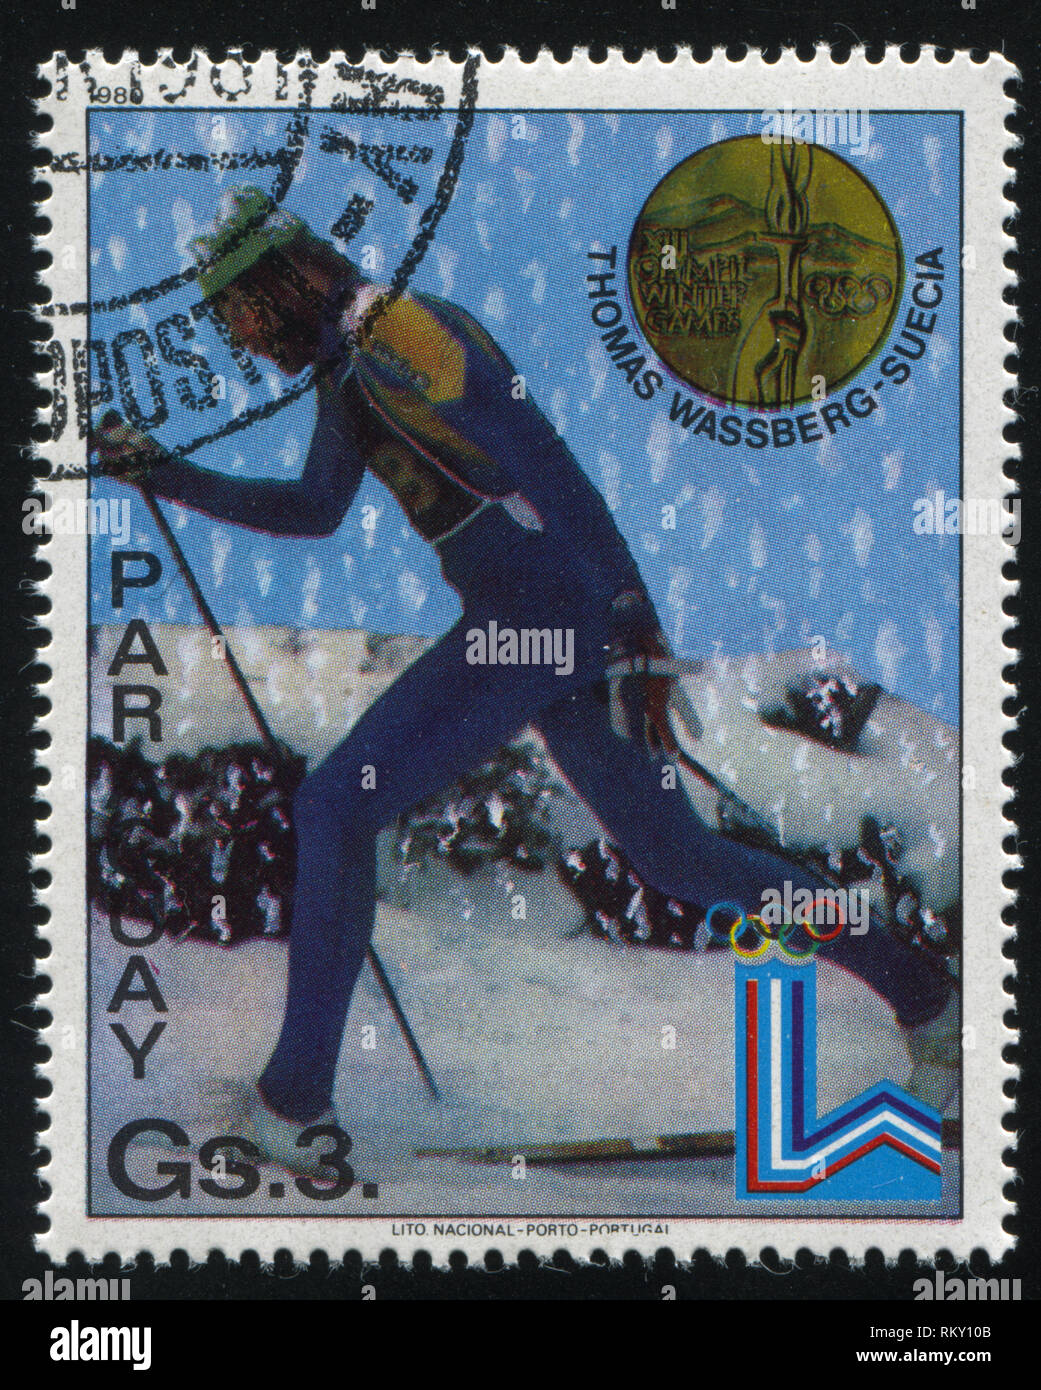 RUSSIA KALININGRAD, 19 APRIL 2017: stamp printed by Paraguay, shows  Thomas Wassberg, Cross country skier at Winter Olympics in Innsbruck, circa 1980 Stock Photo